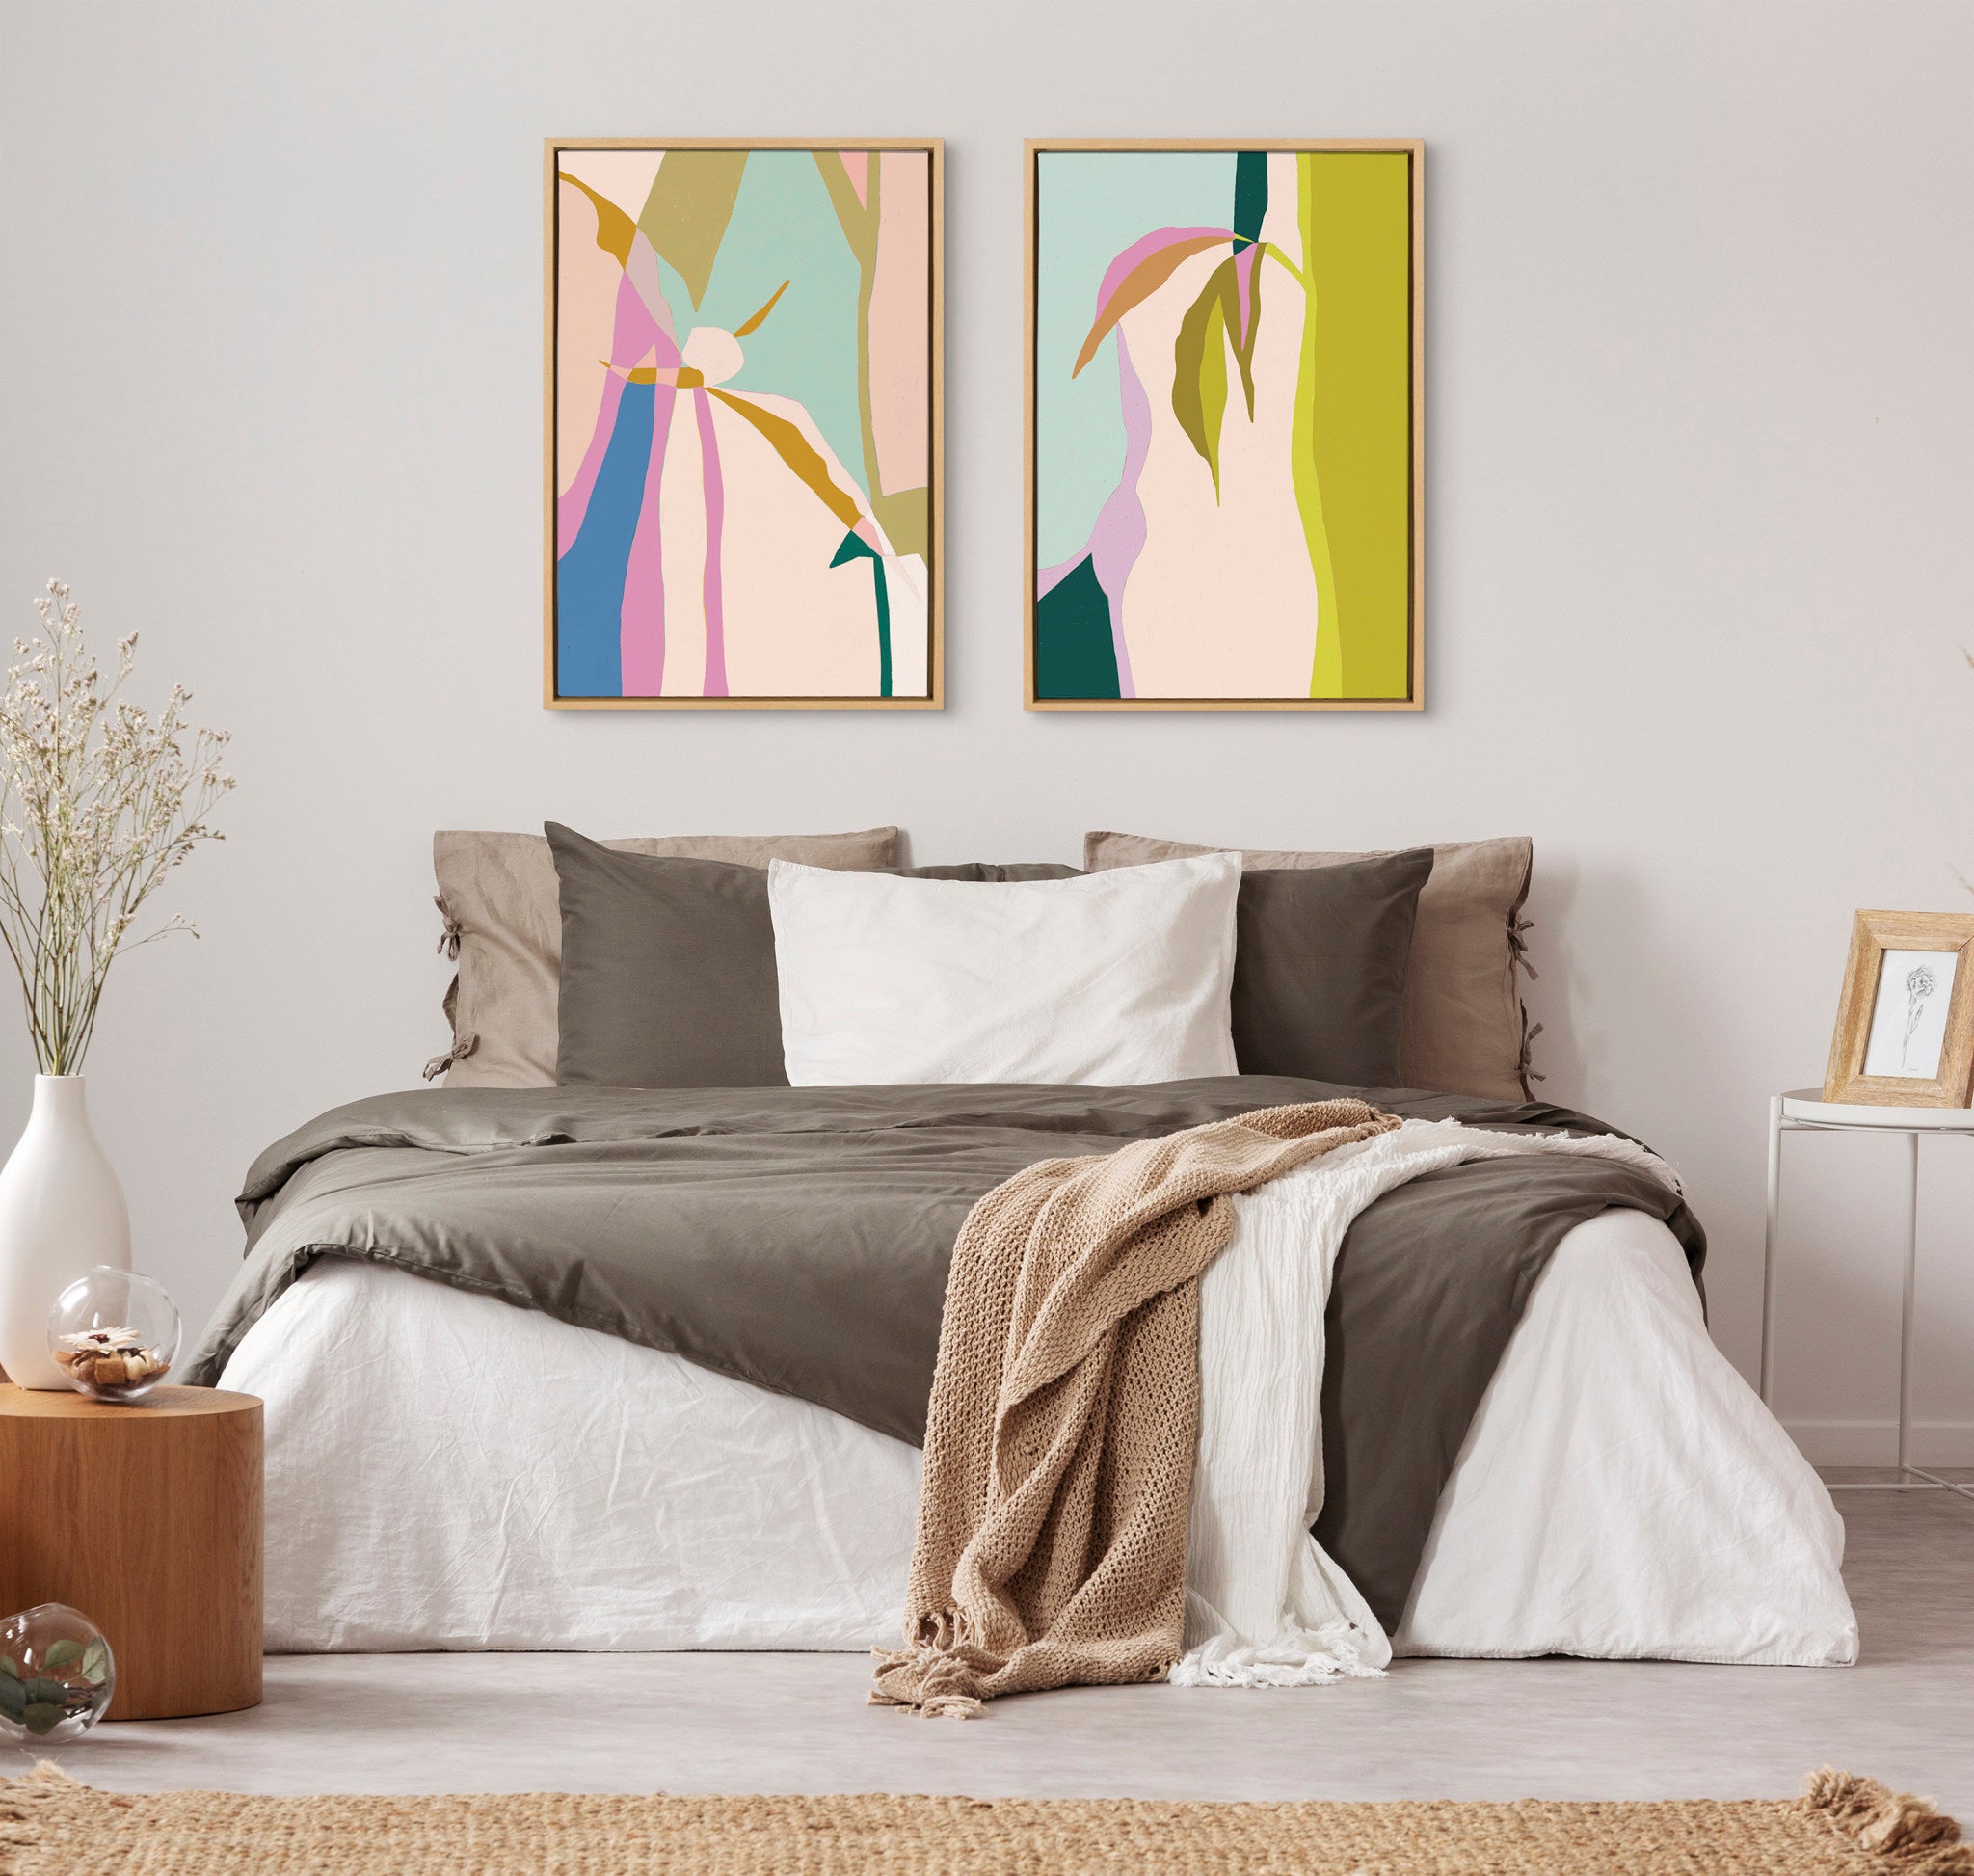 Sylvie Delight in the Moment 1 and 2 Framed Canvas by Alicia Schultz